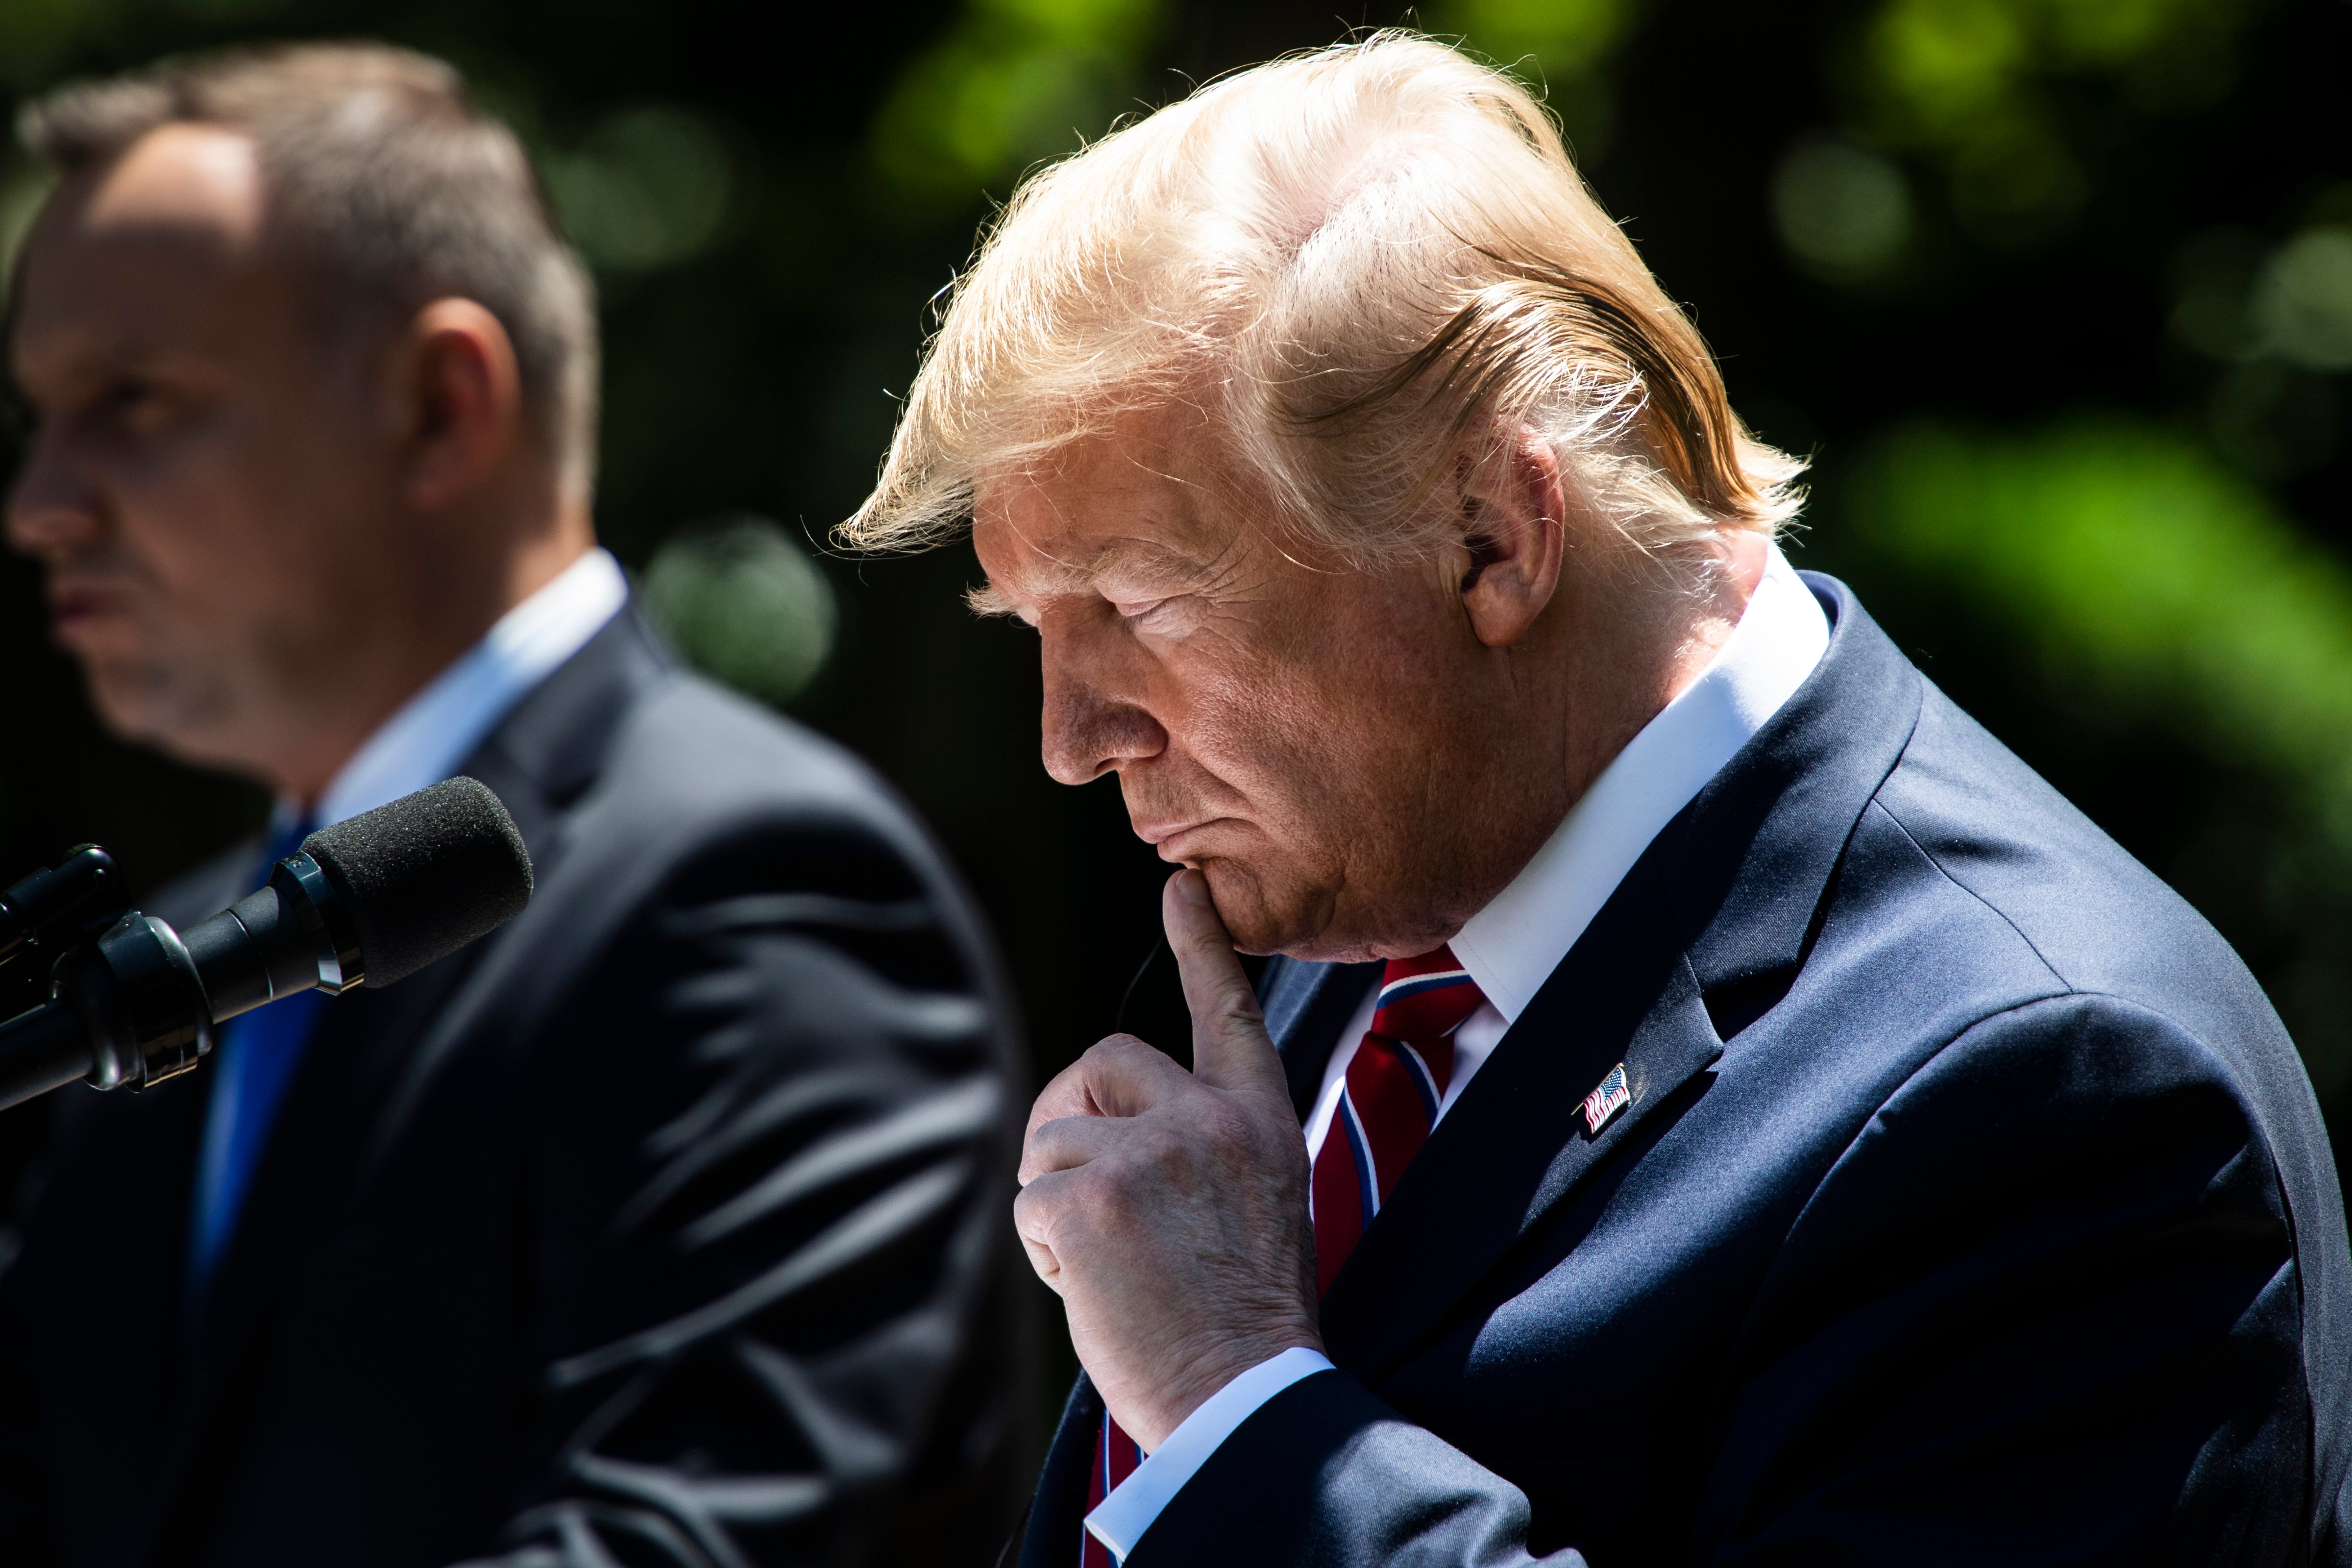 President Donald J. Trump and President of the Republic of Poland Andrzej Duda participate in a joint press conference in the Rose Garden at the White House in Washington, DC. on June 12, 2019. (Jabin Botsford—The Washington Post/Getty Images)